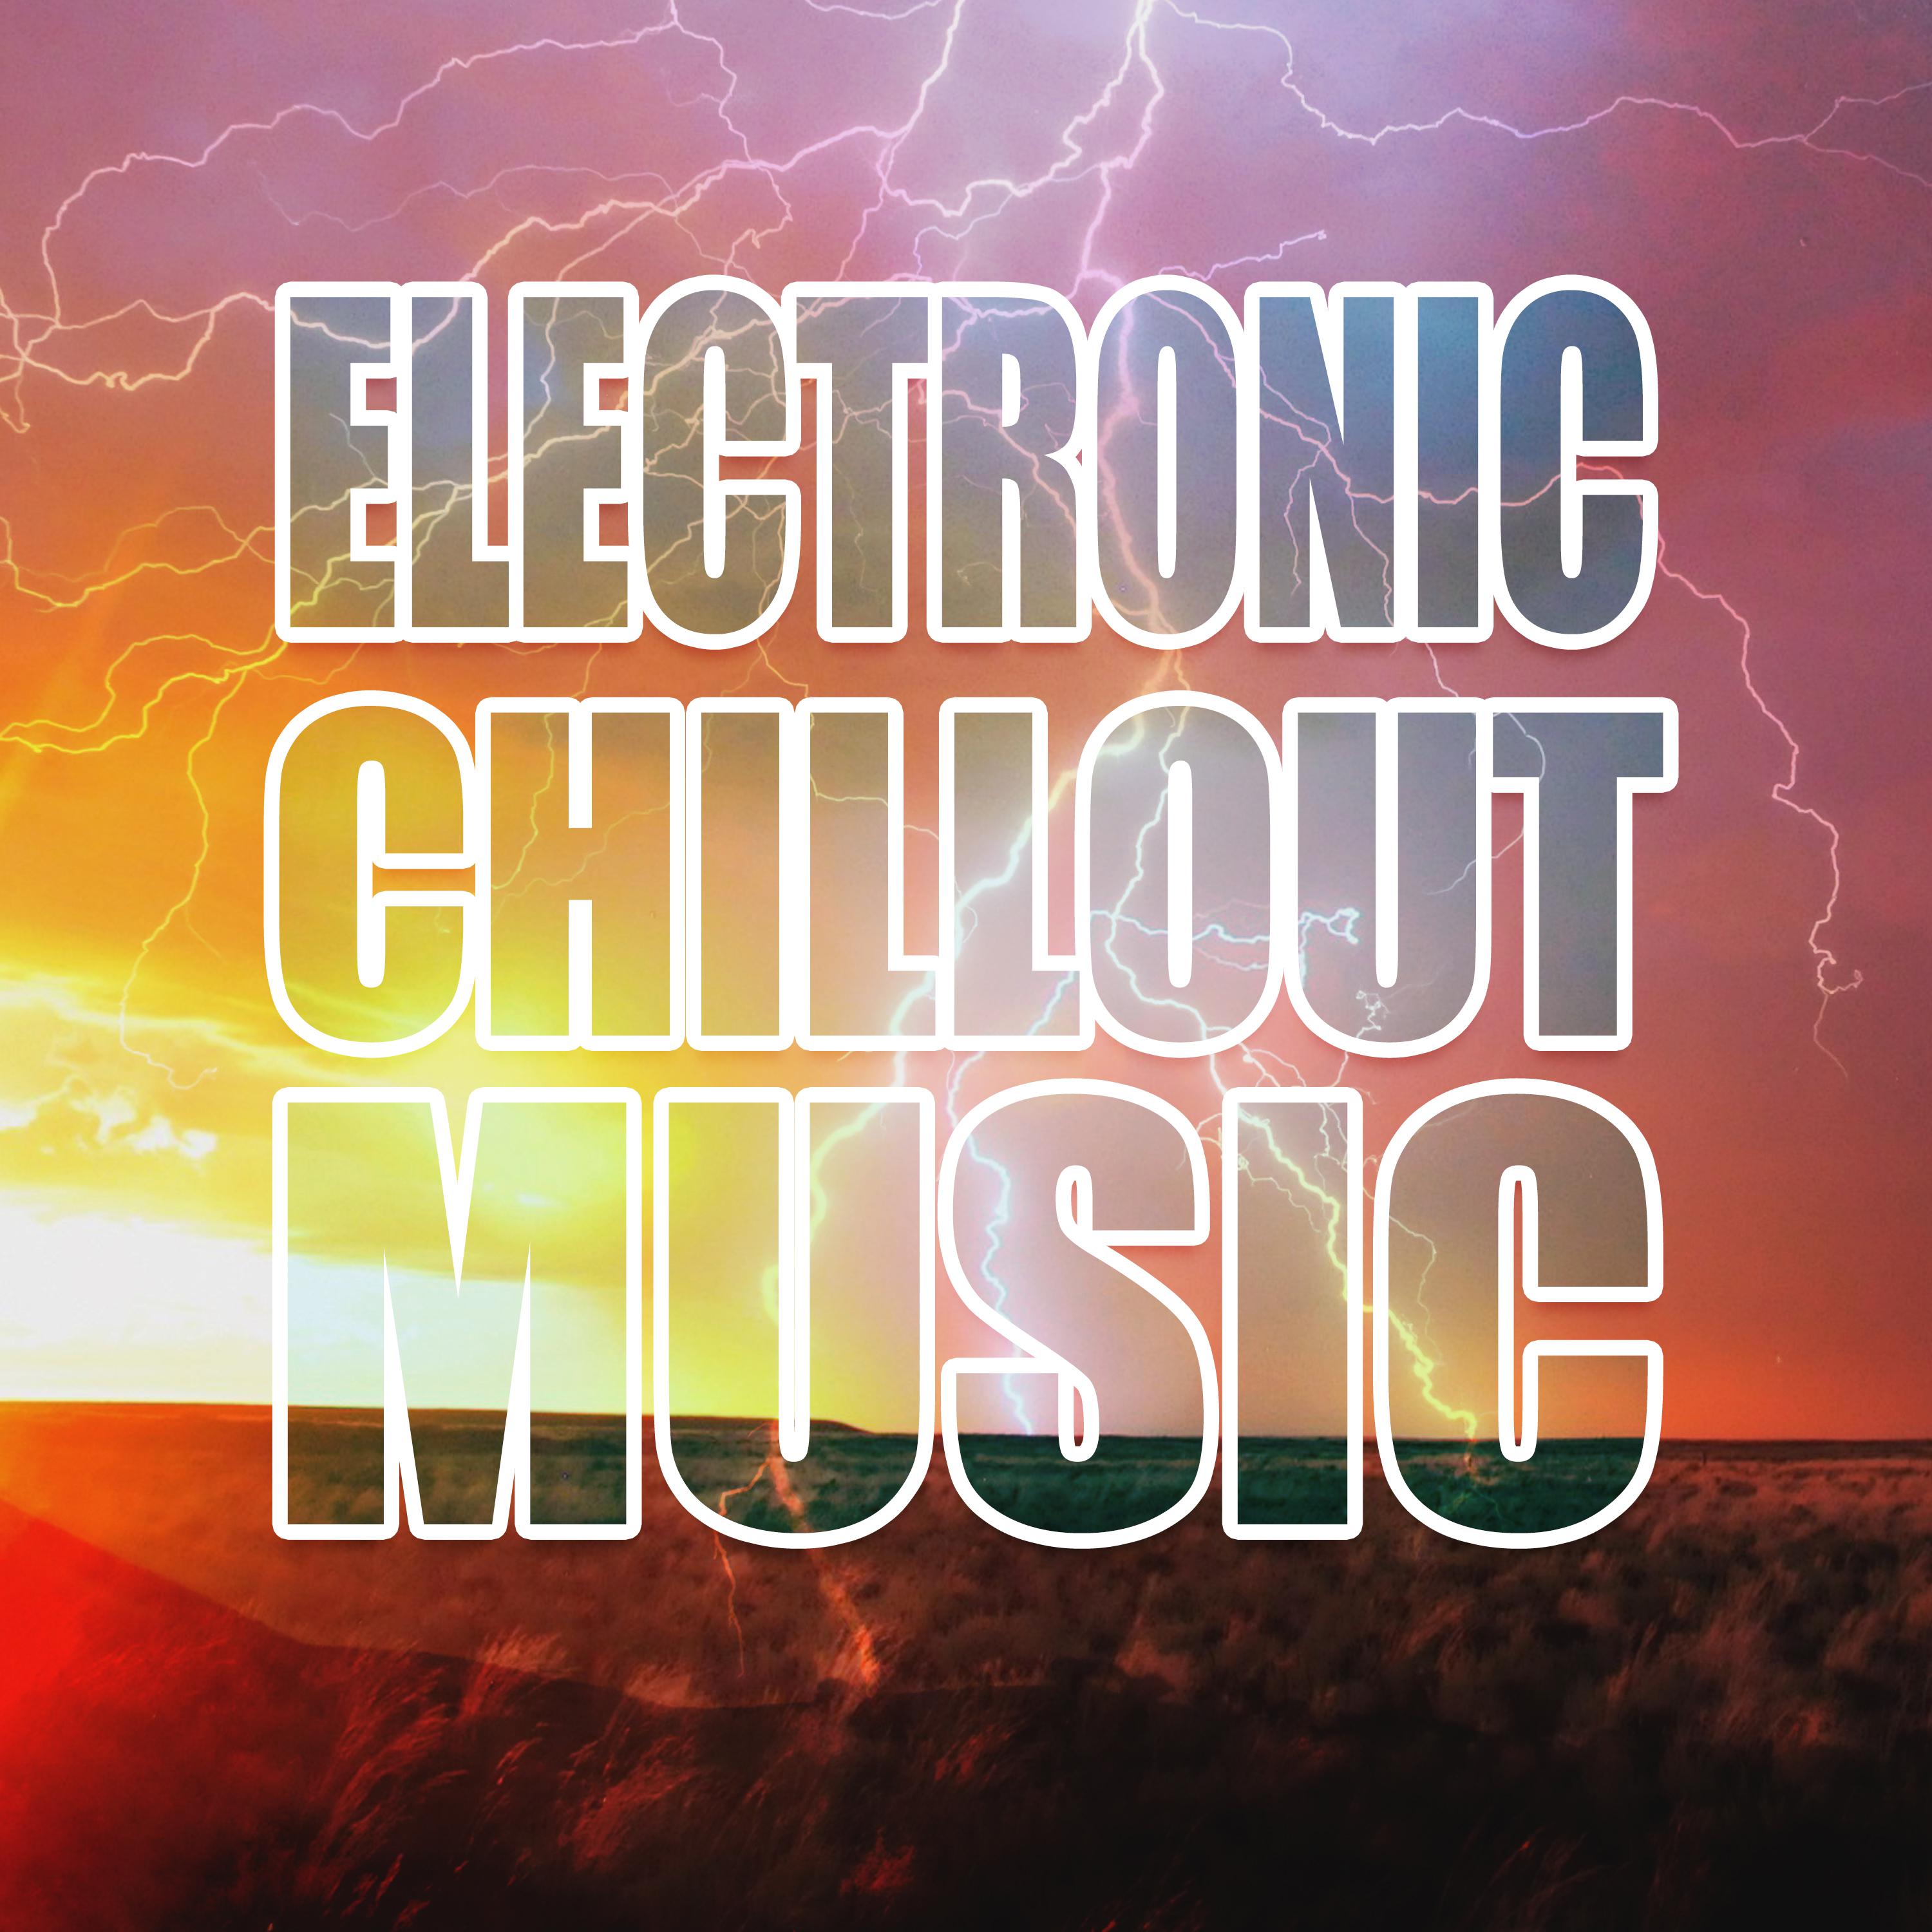 Electronic Chillout Music – Summer Chill Out, Beach Music, Ambient, Lounge Chill Out, Electro